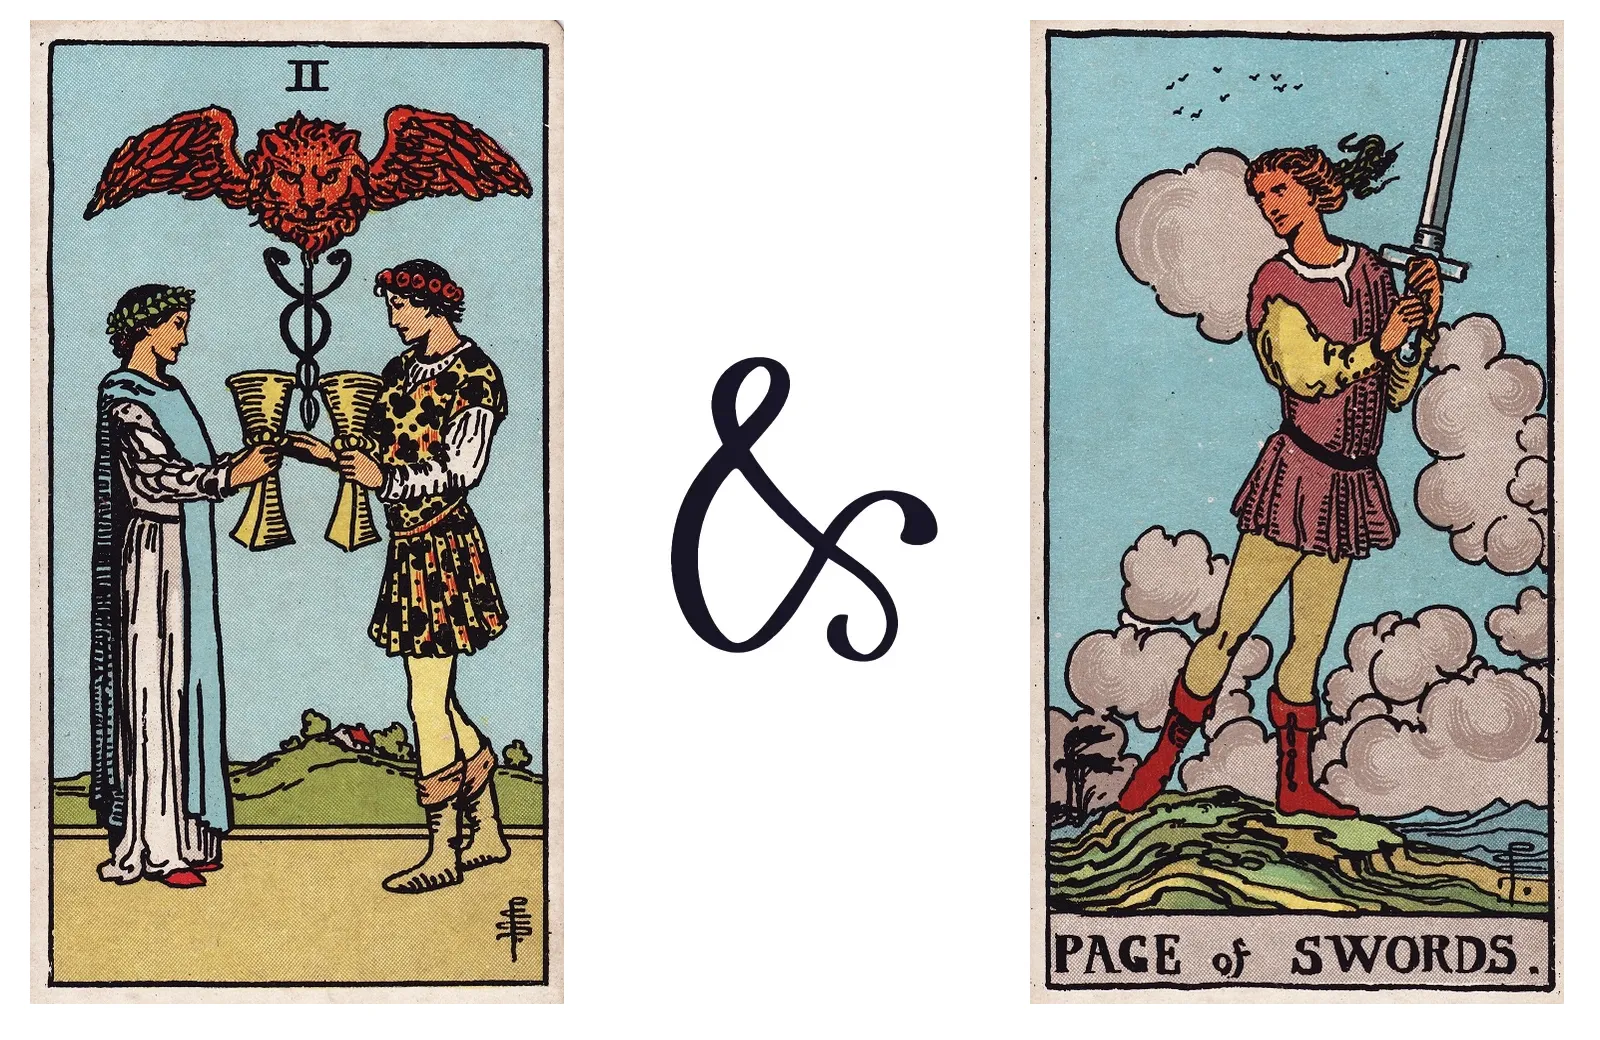 Two of Cups and Page of Swords